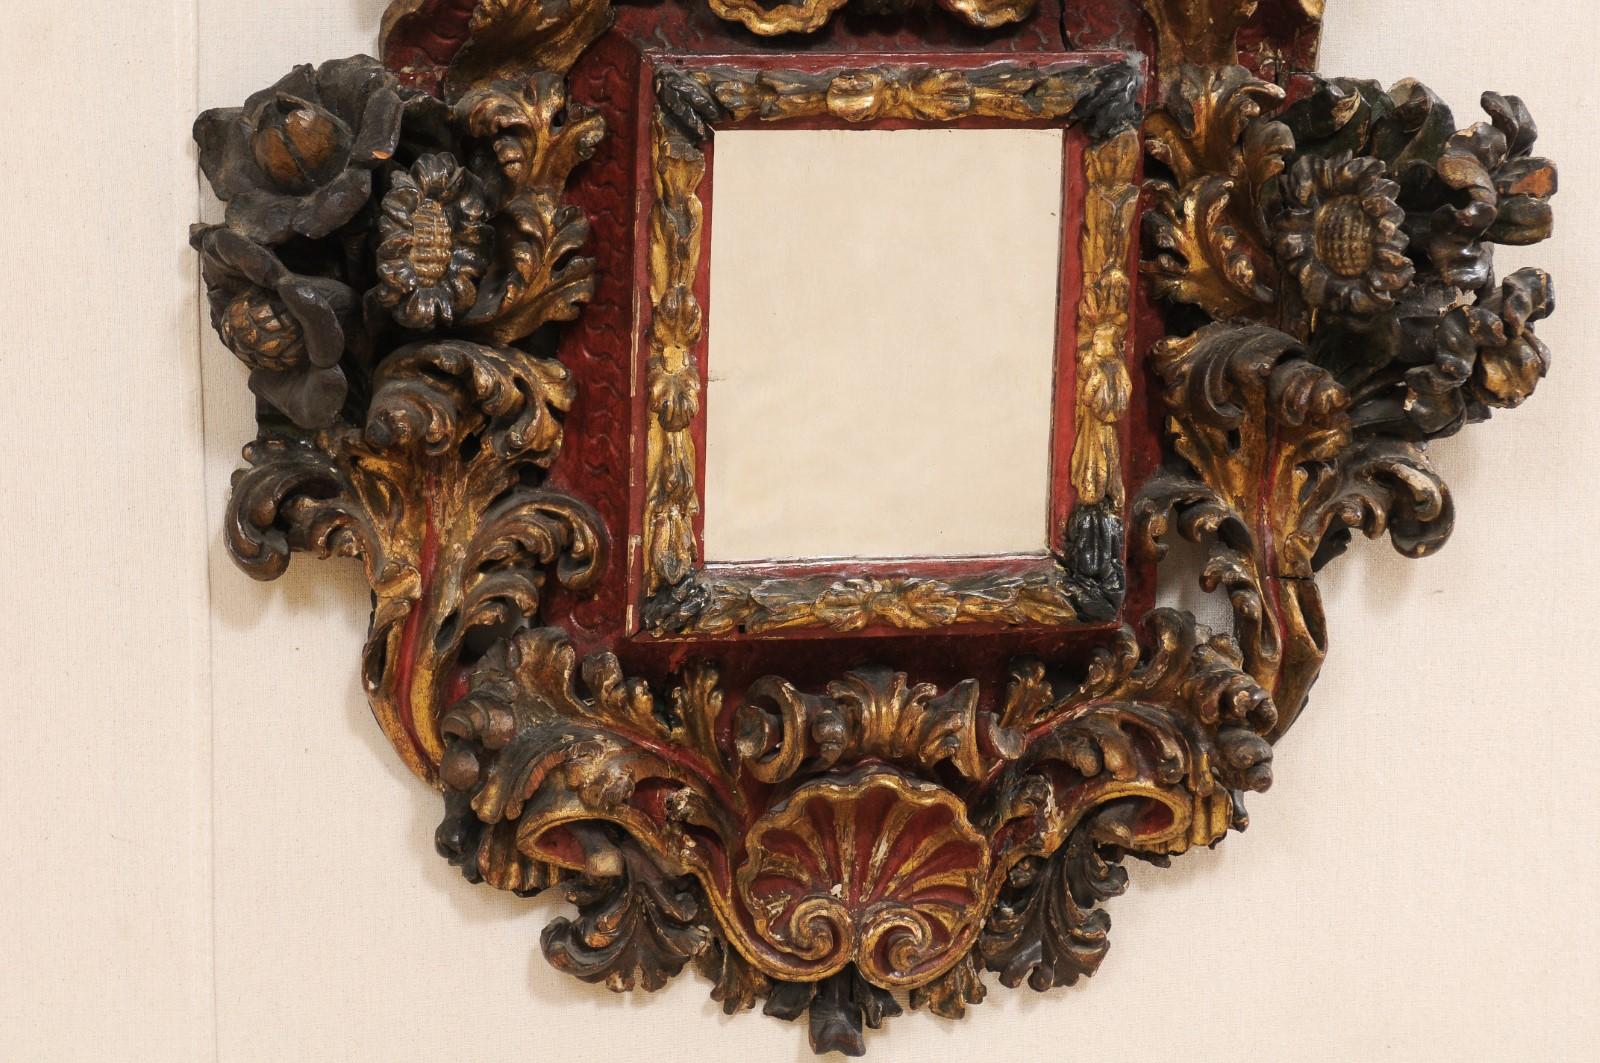 18th Century Italian Baroque Period Ornately-Carved Wood Wall Plaque with Mirror 2